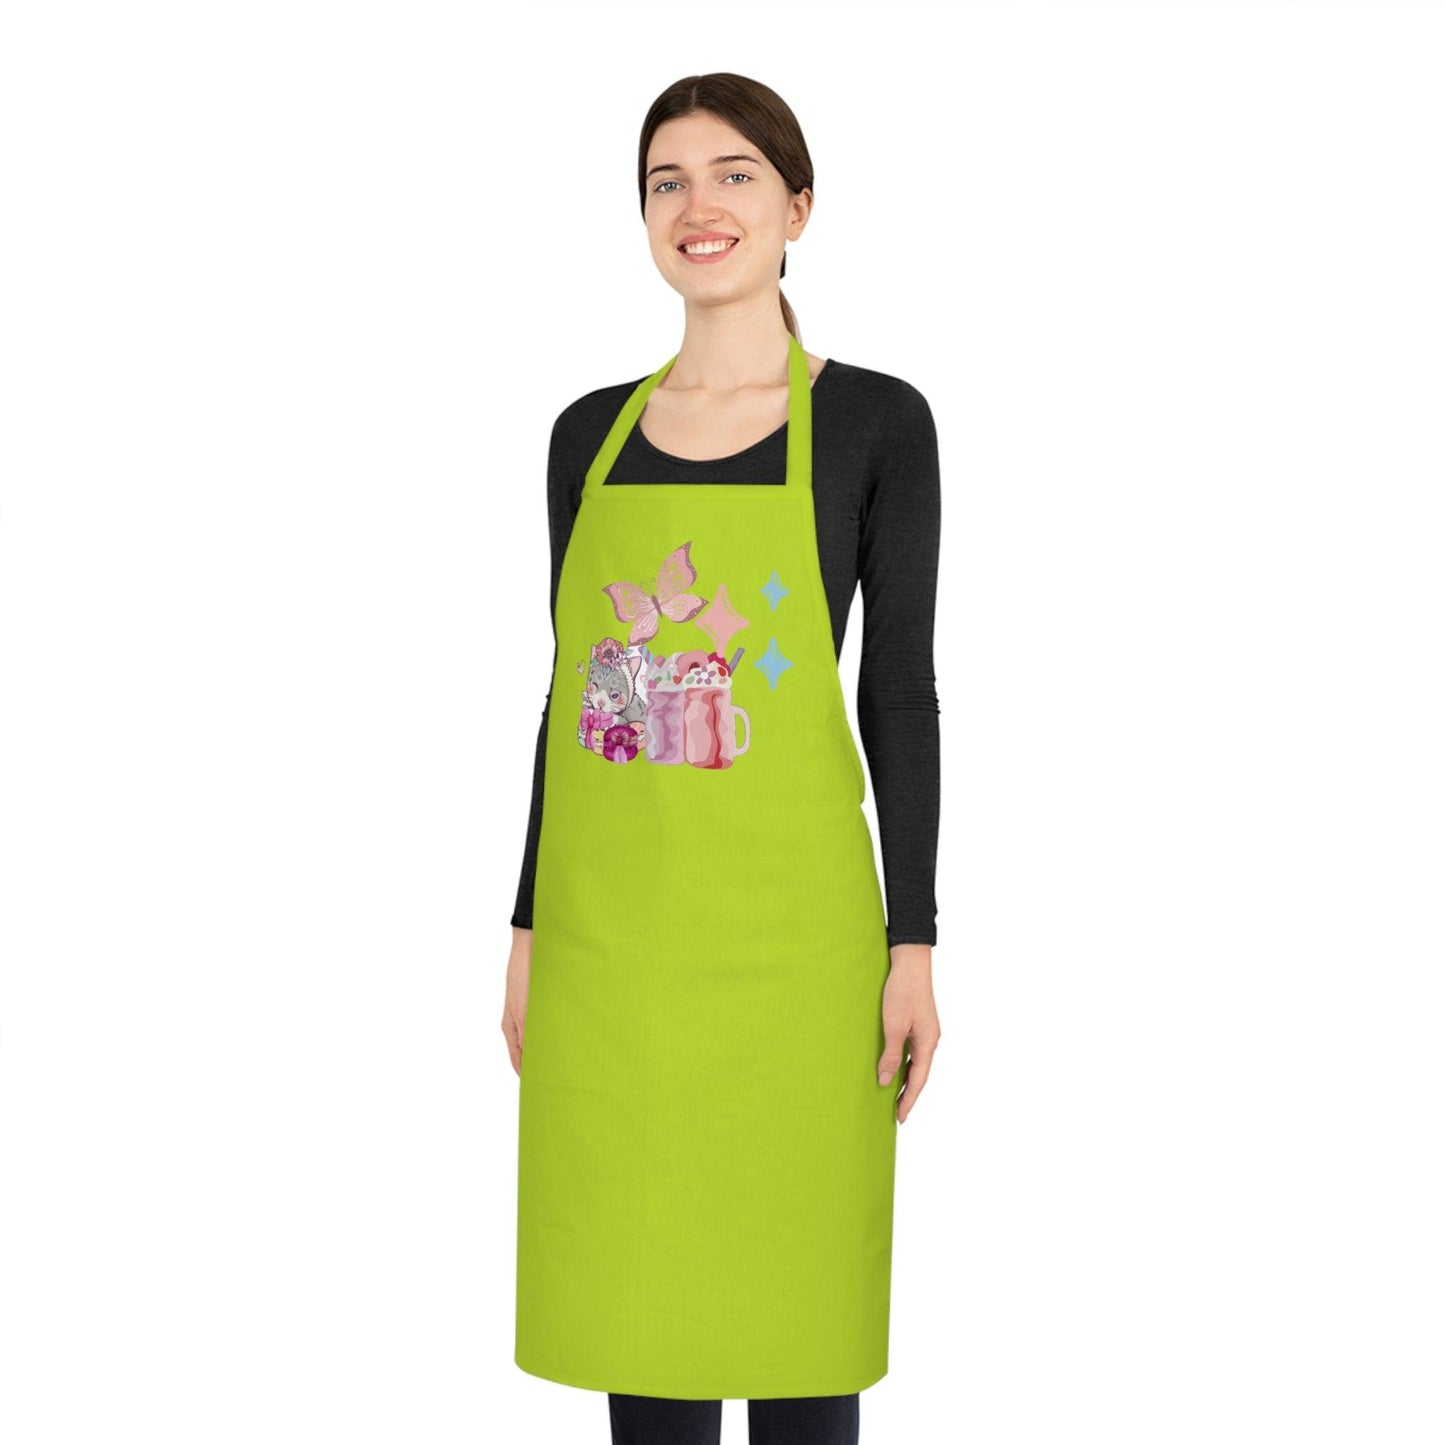 Cute Adult Cafe Kitchen Apron - COFFEEBRE